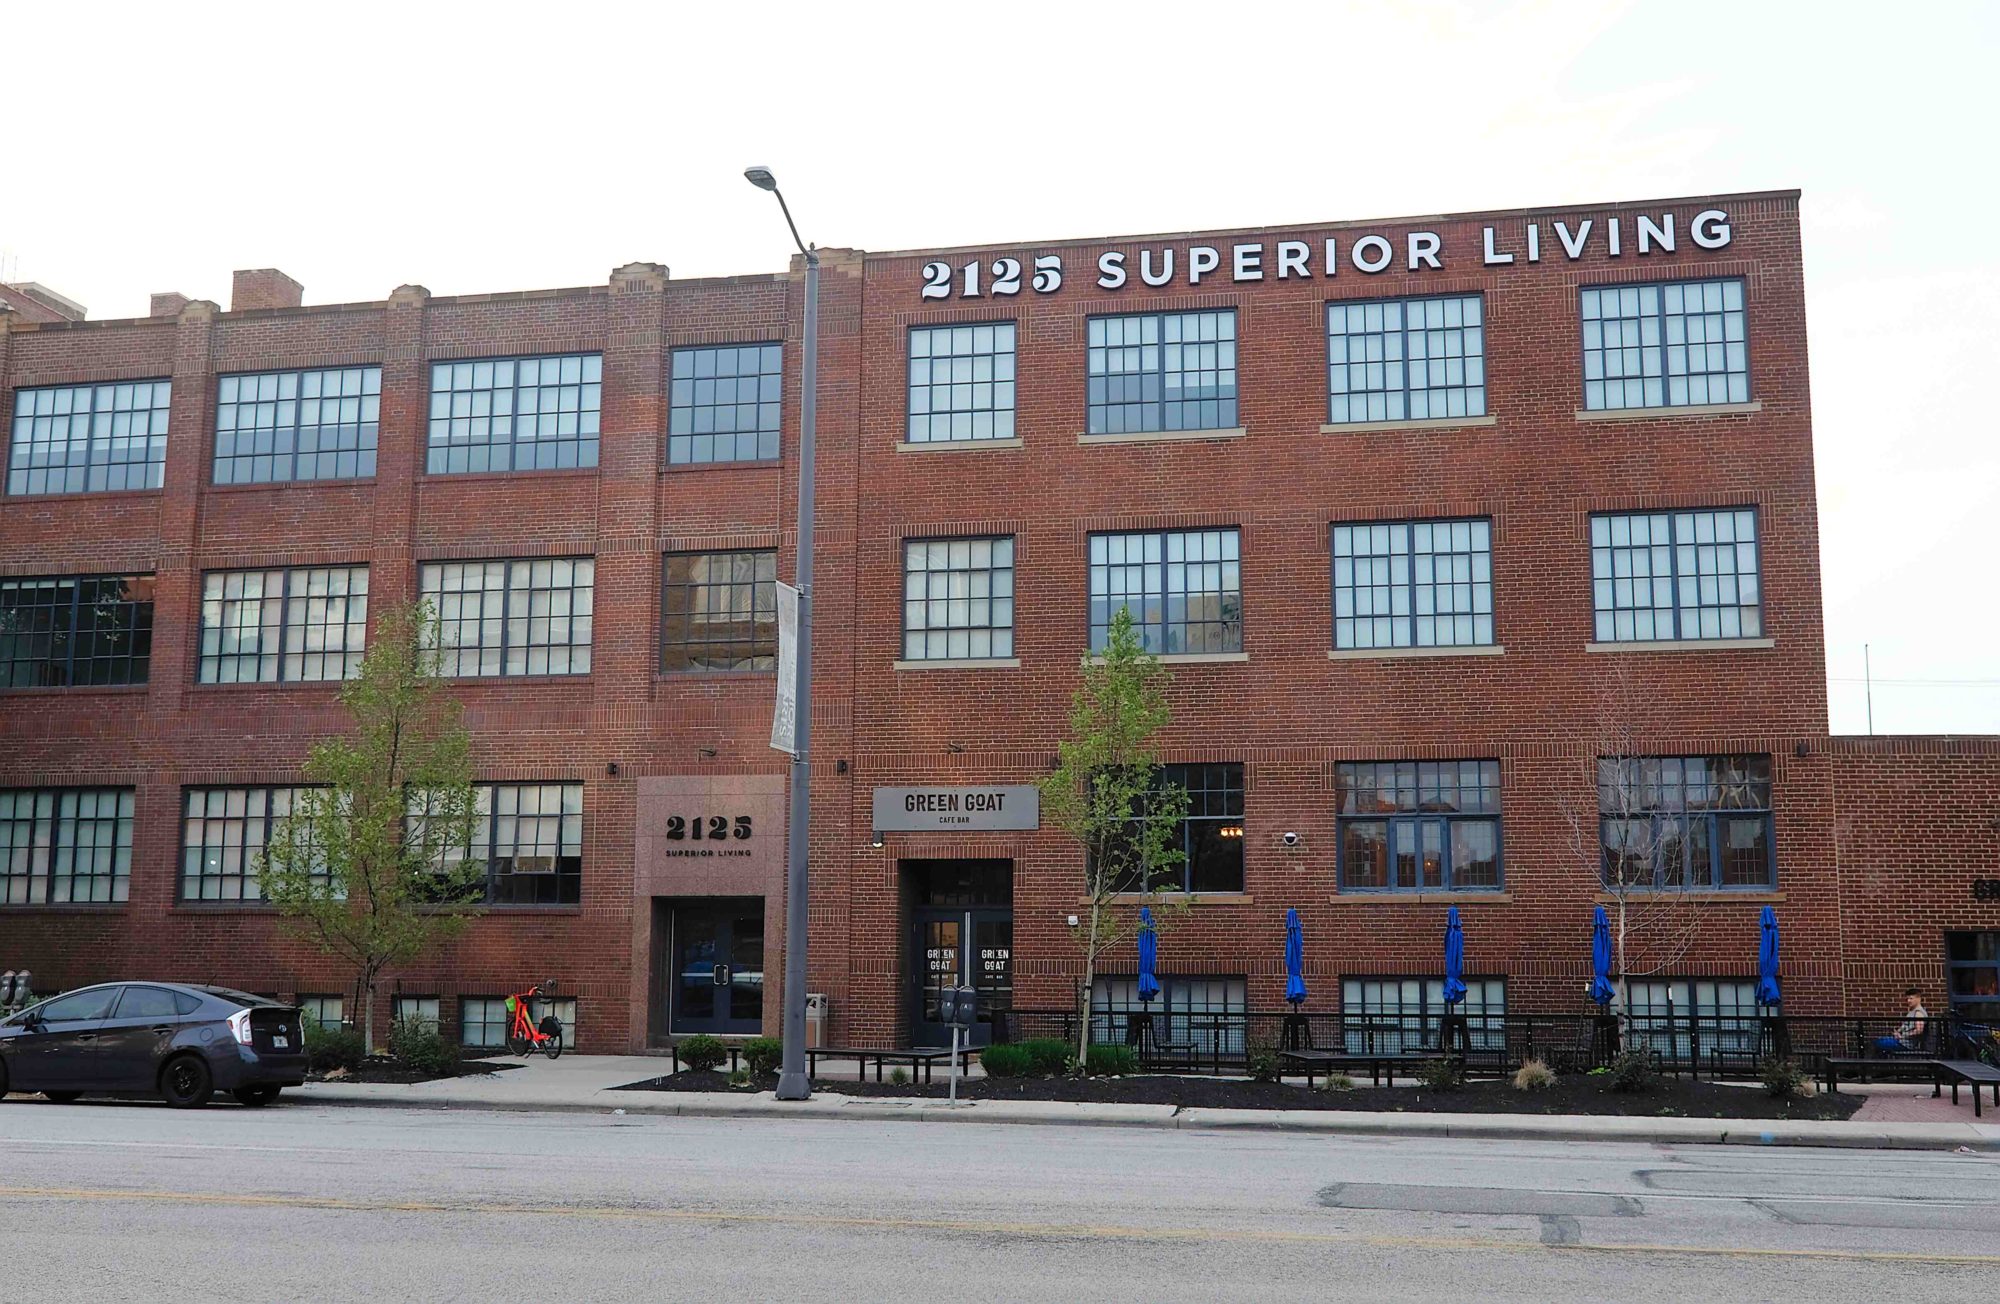 Exterior of Airriva in Cleveland